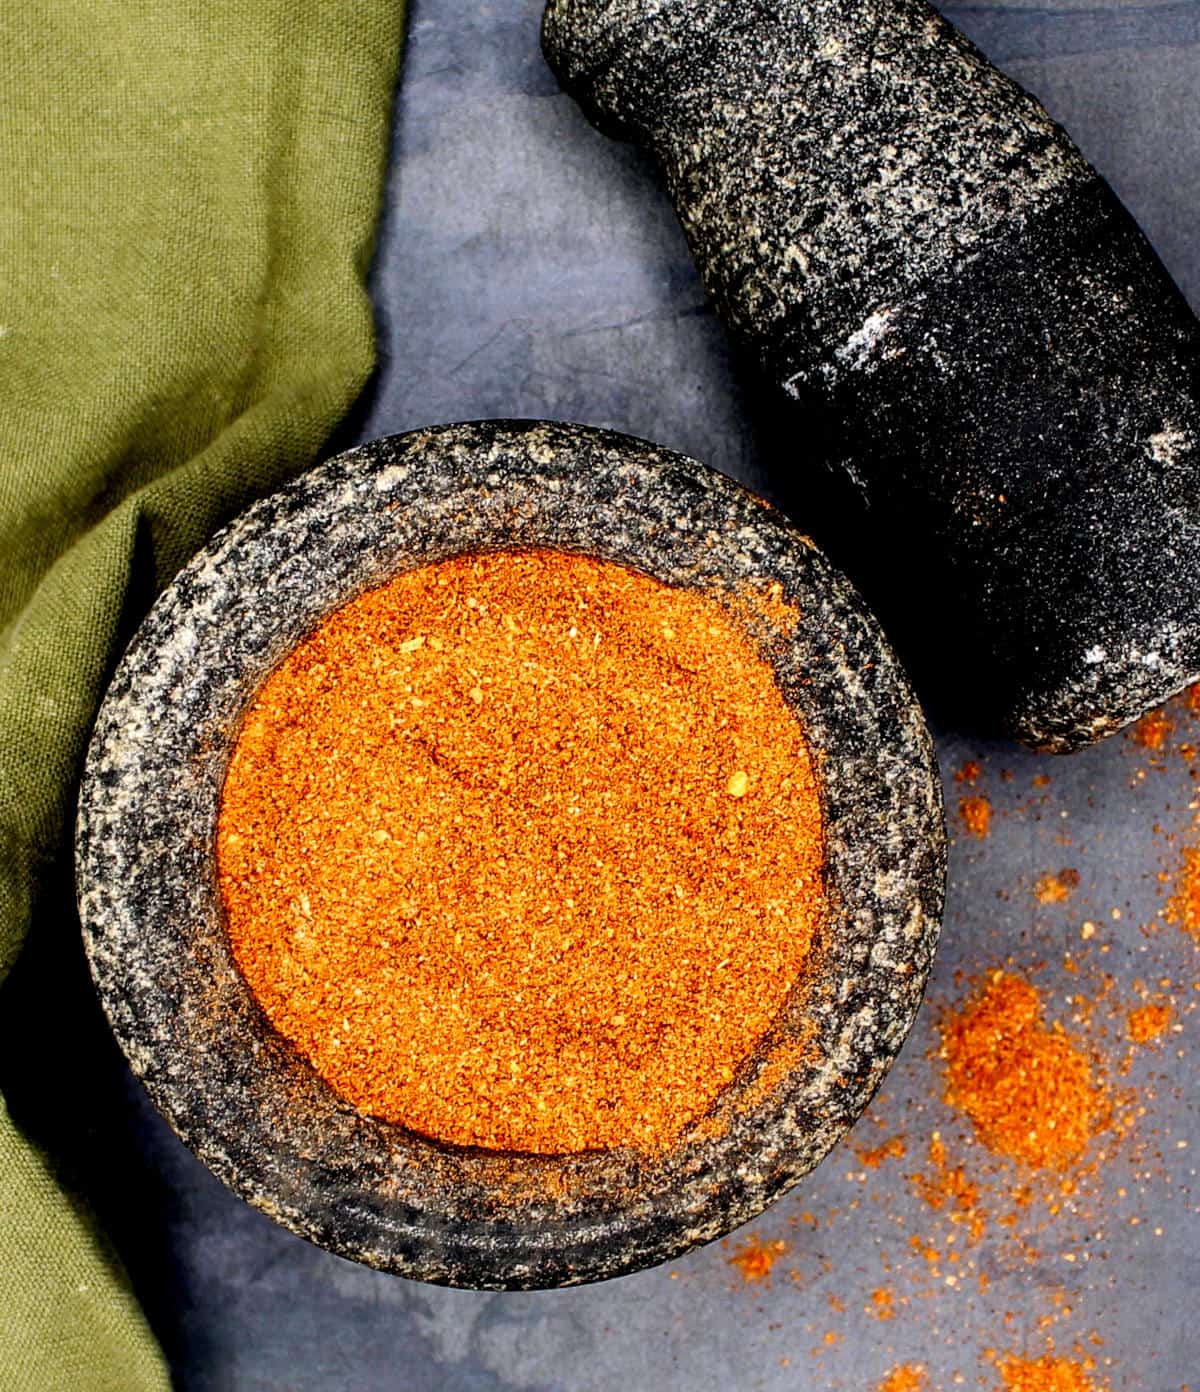 Ethiopian berbere spice mix in mortar and pestle with green napkin on side.